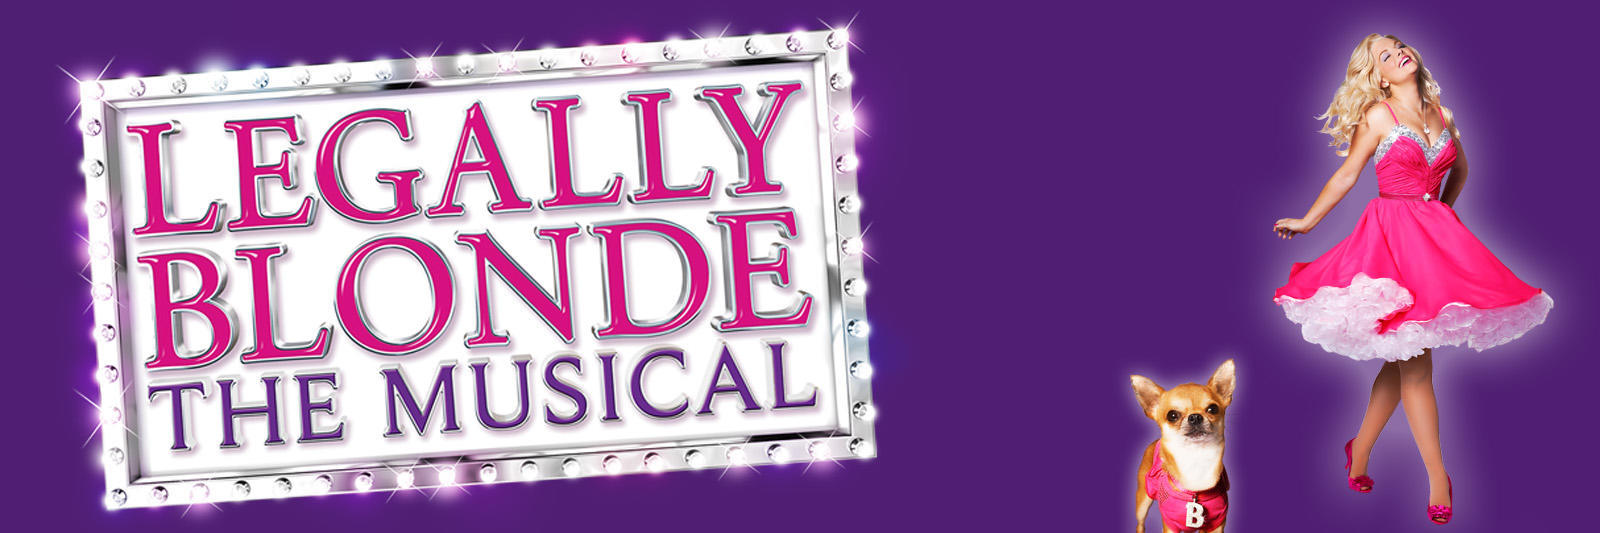 Legally Blonde the musical 